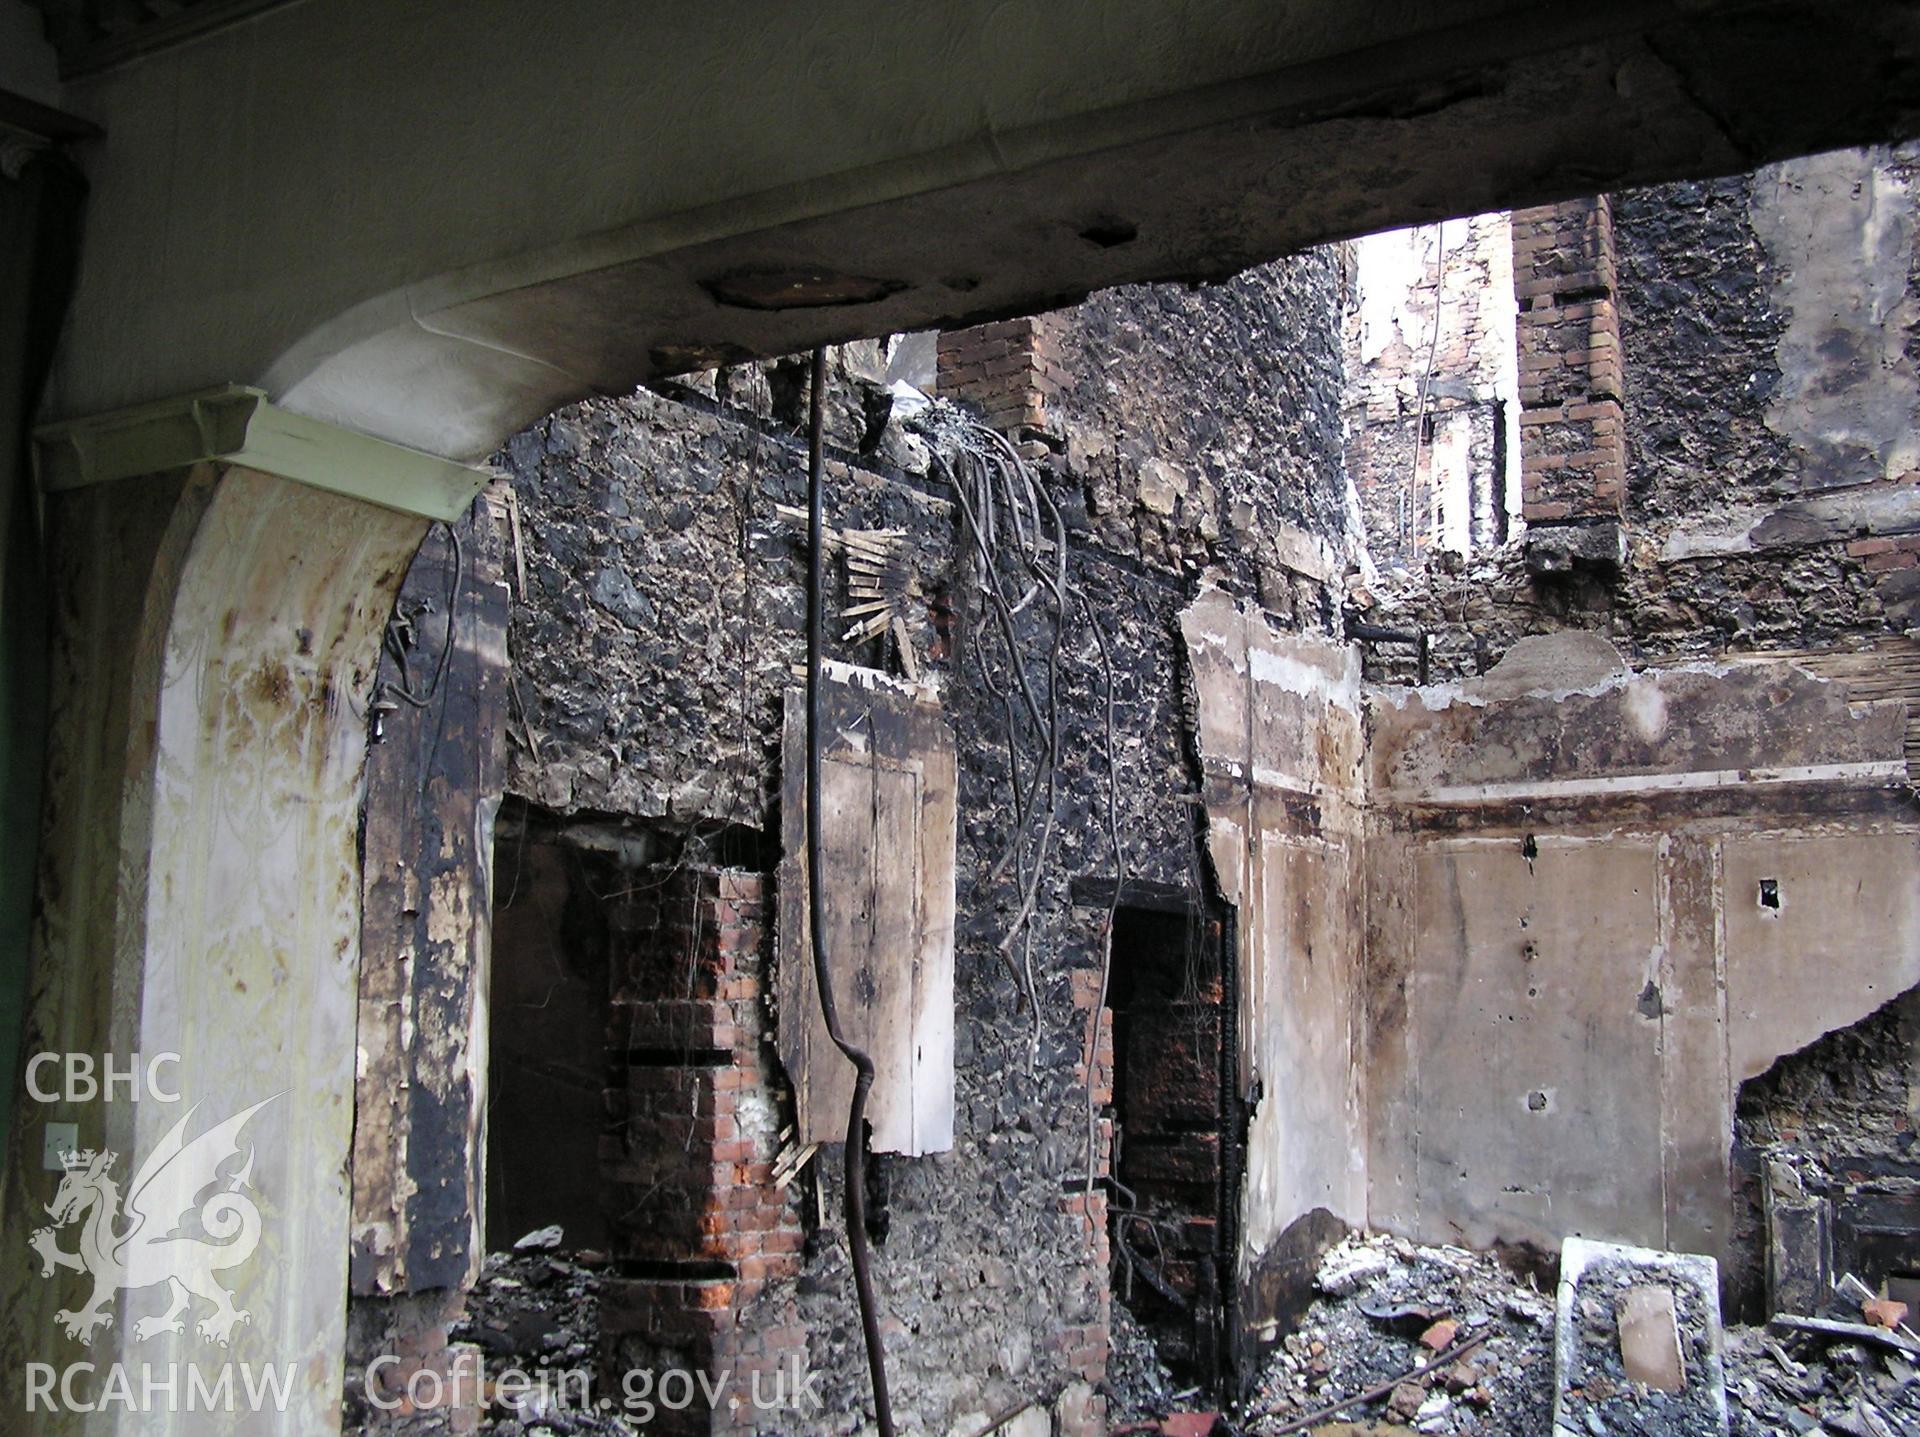 Colour digital photograph showing the damage caused by fire to the Royal Gatehouse Hotel.